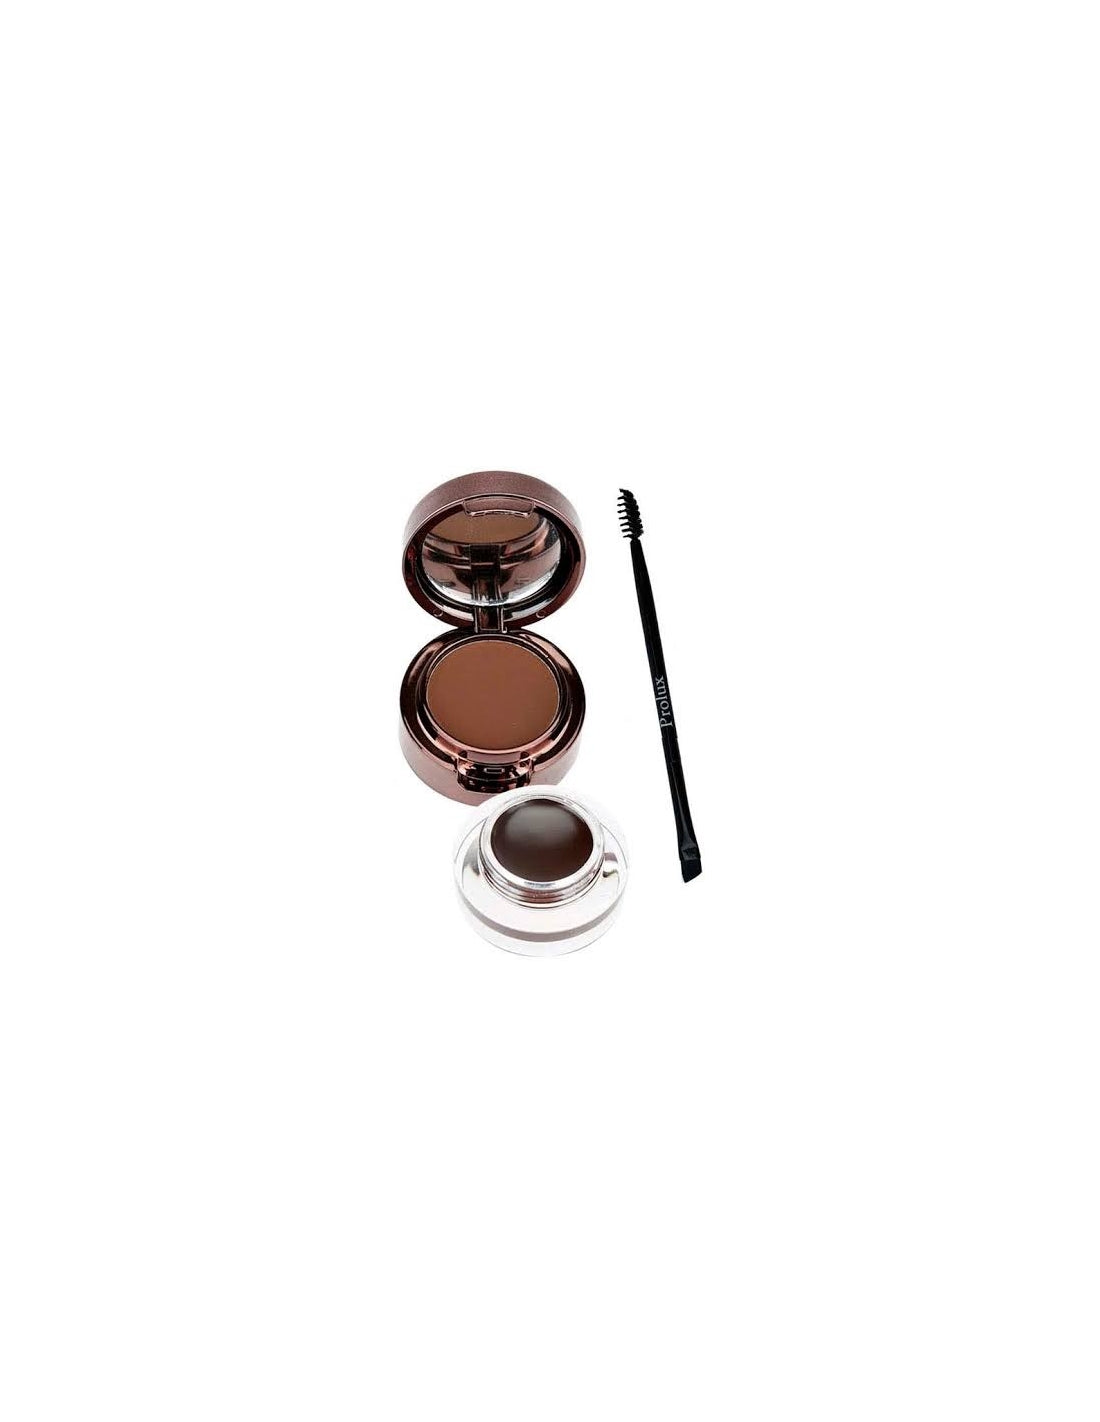 Prolux Dark Brown Eyebrow Pomade and Shadow